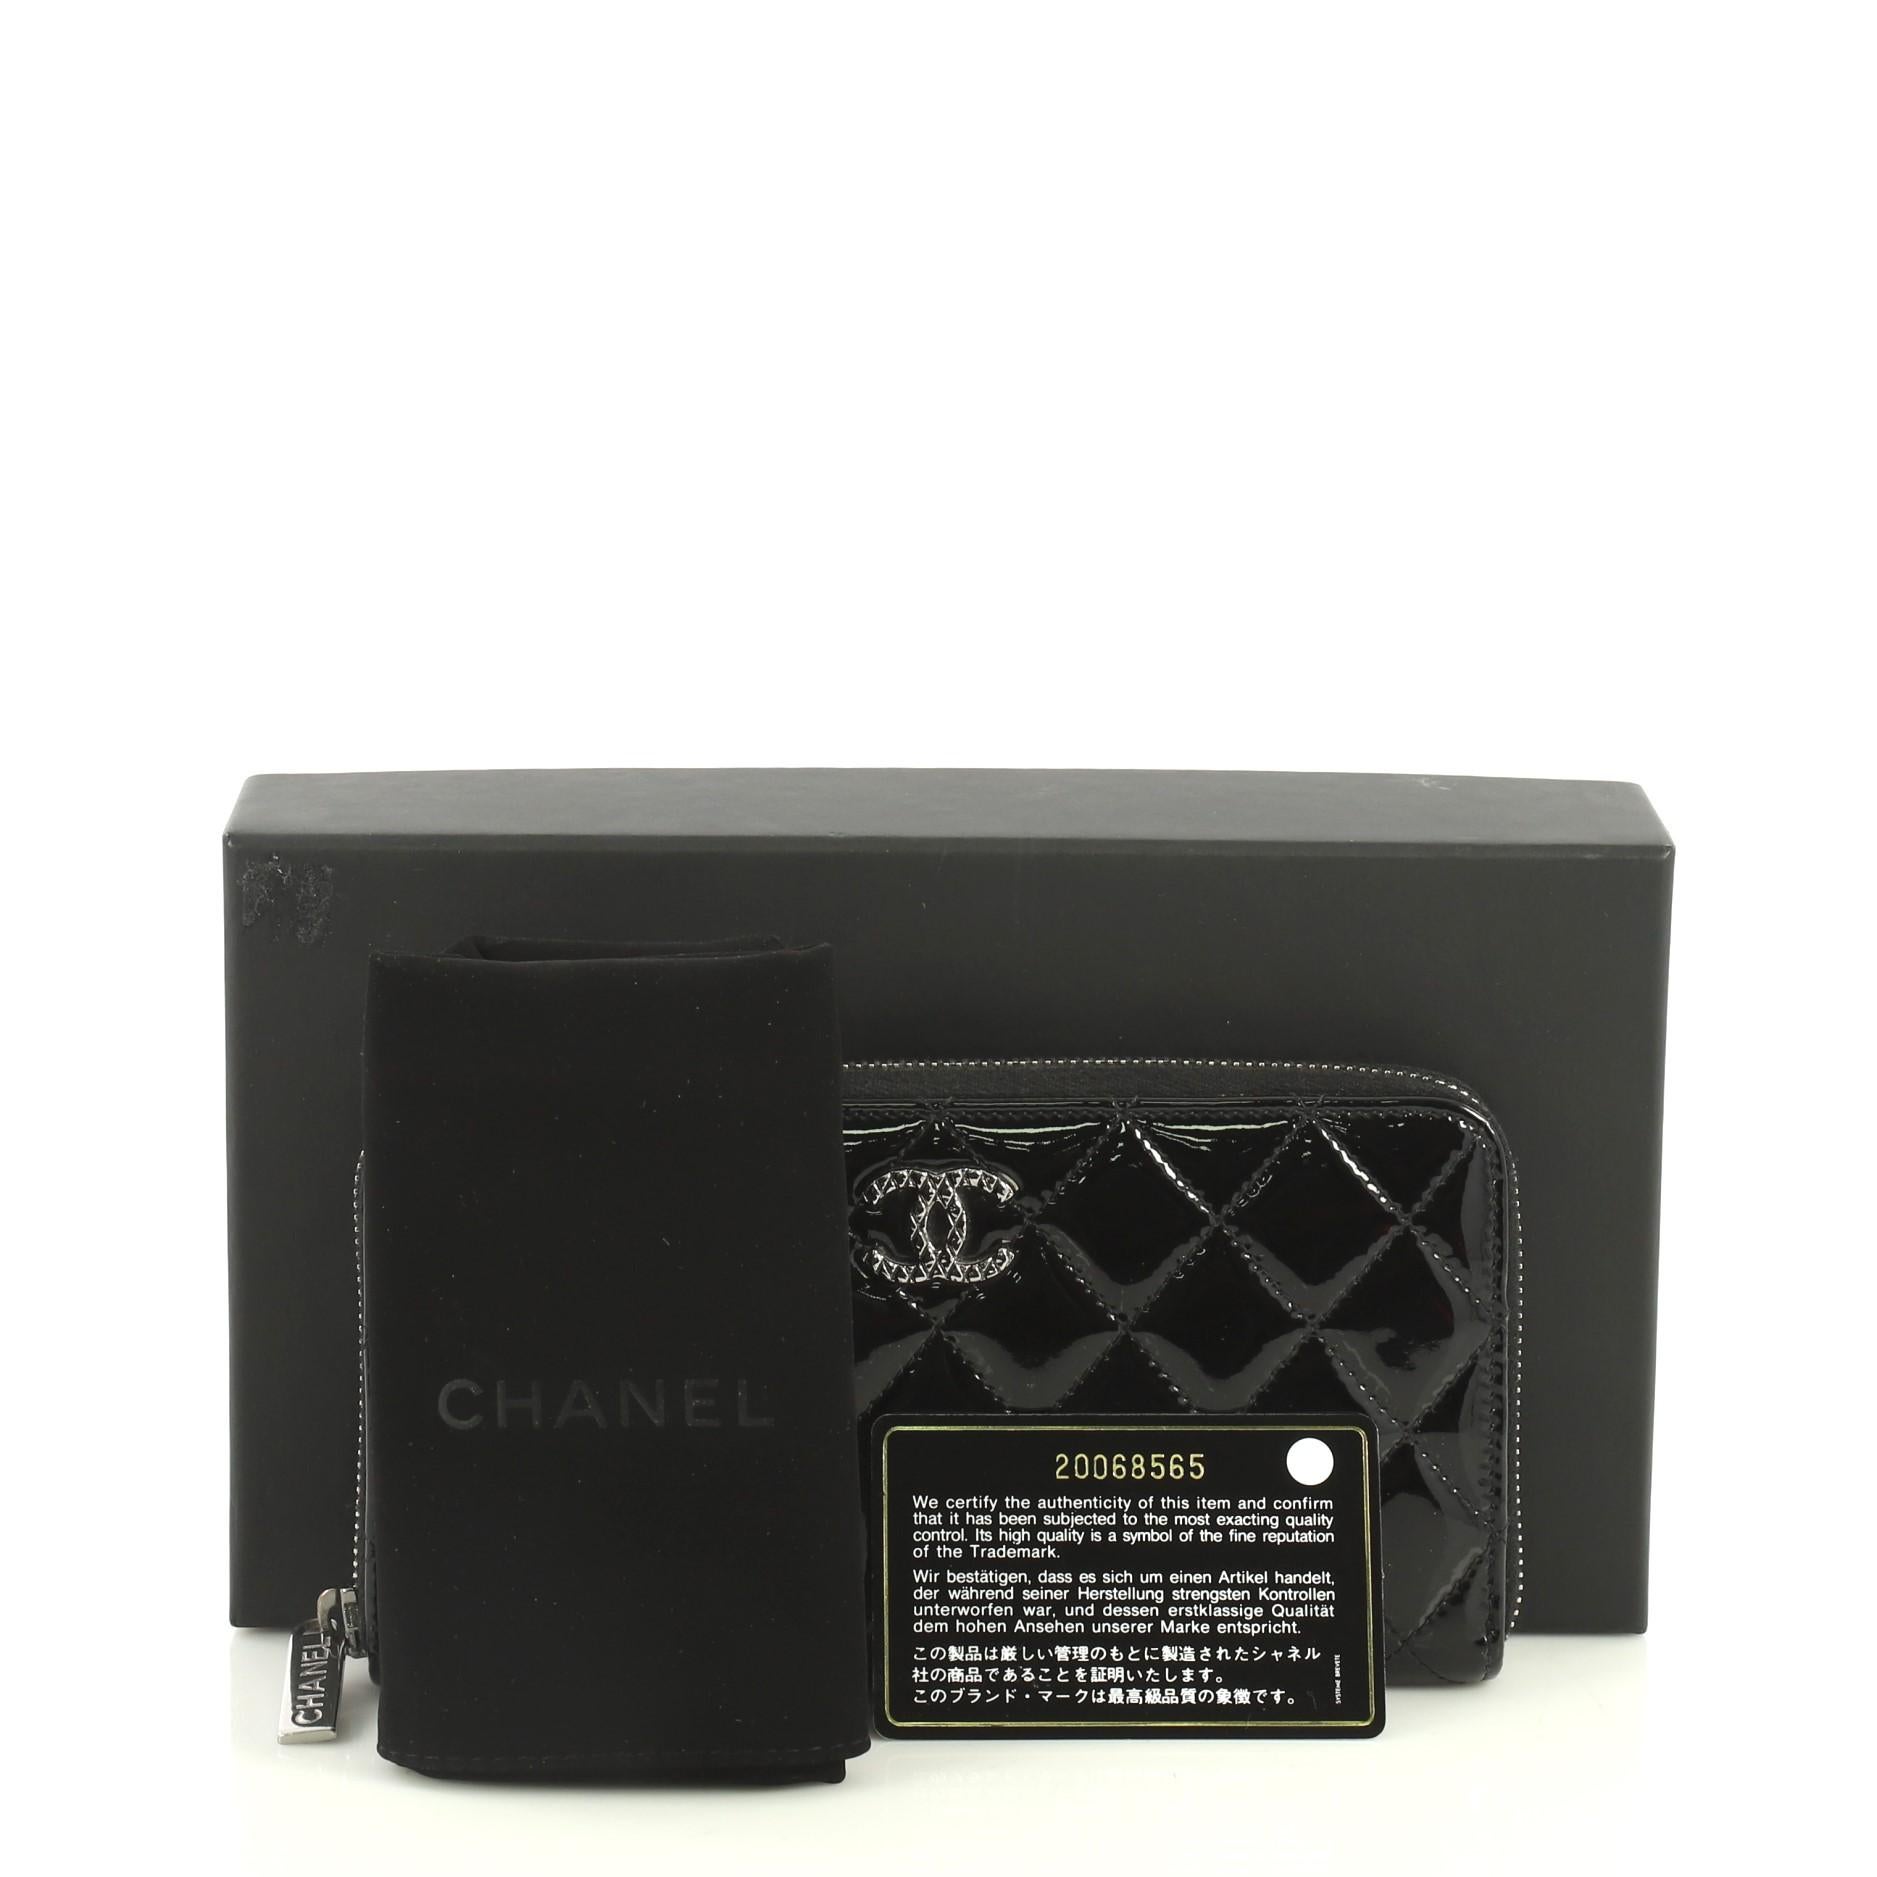 This Chanel Brilliant Zip Around Wallet Quilted Patent Long, crafted from black quilted patent leather, features textured CC logo and silver-tone hardware. Its zip-around closure opens to a black leather interior with multiple card slots, center zip